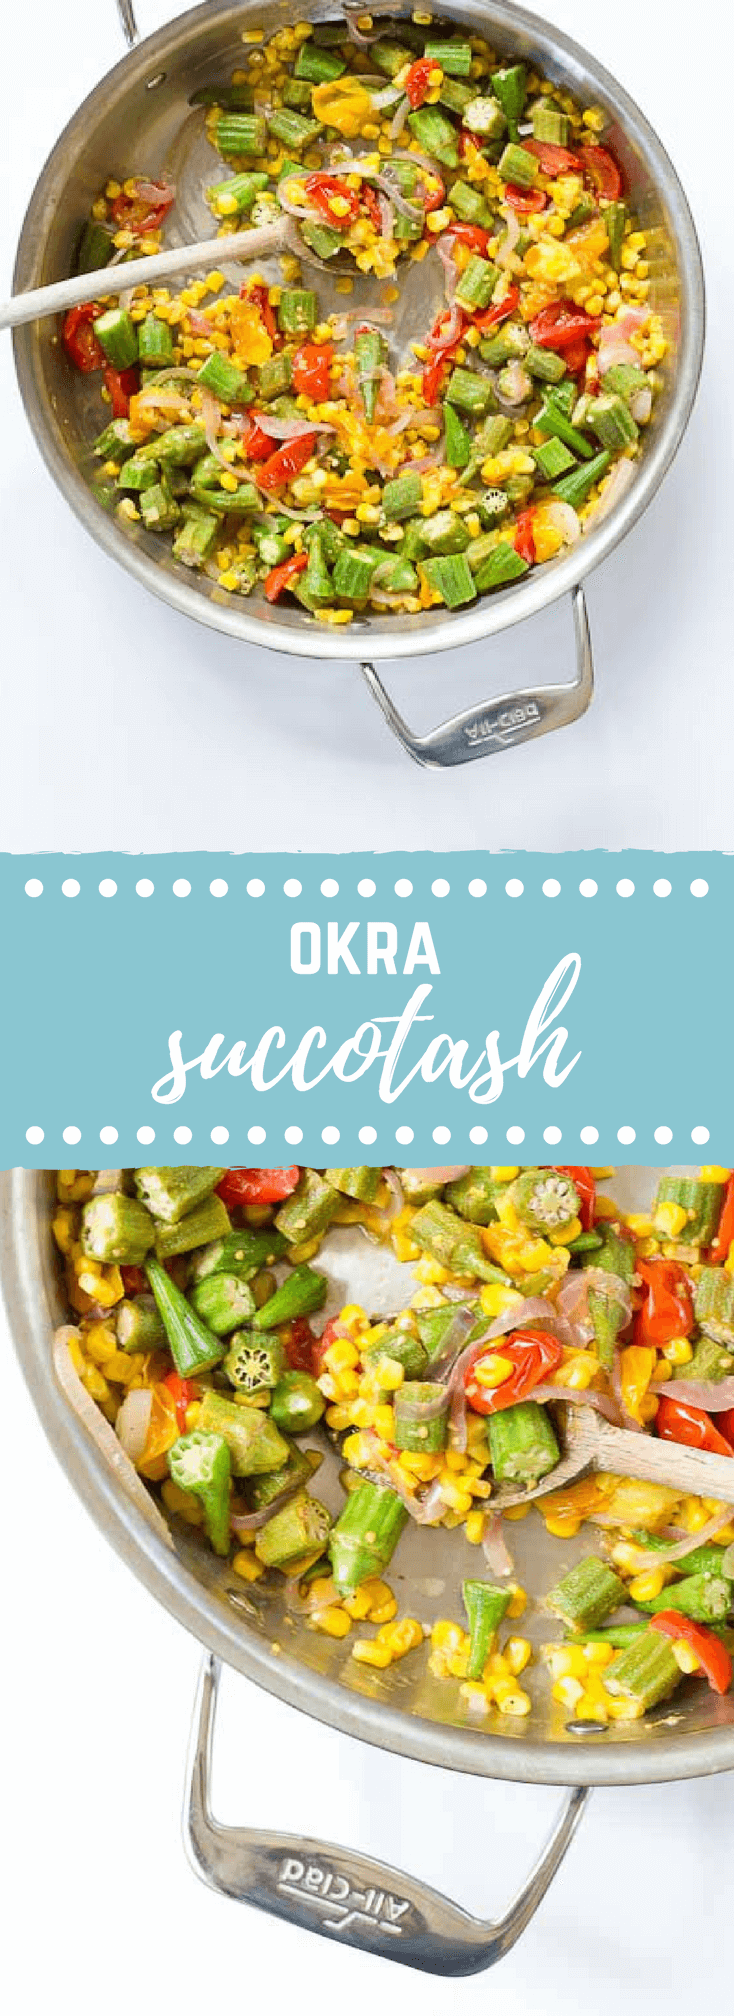 Okra Succotash, a simple sauté of fresh okra, corn, tomatoes, and onions, is a yummmmm side dish for your next cookout... just in time for Memorial Day! I love this side because it's fresh and filled with seasonal veggies that will make you feel good on a hot sunny day.